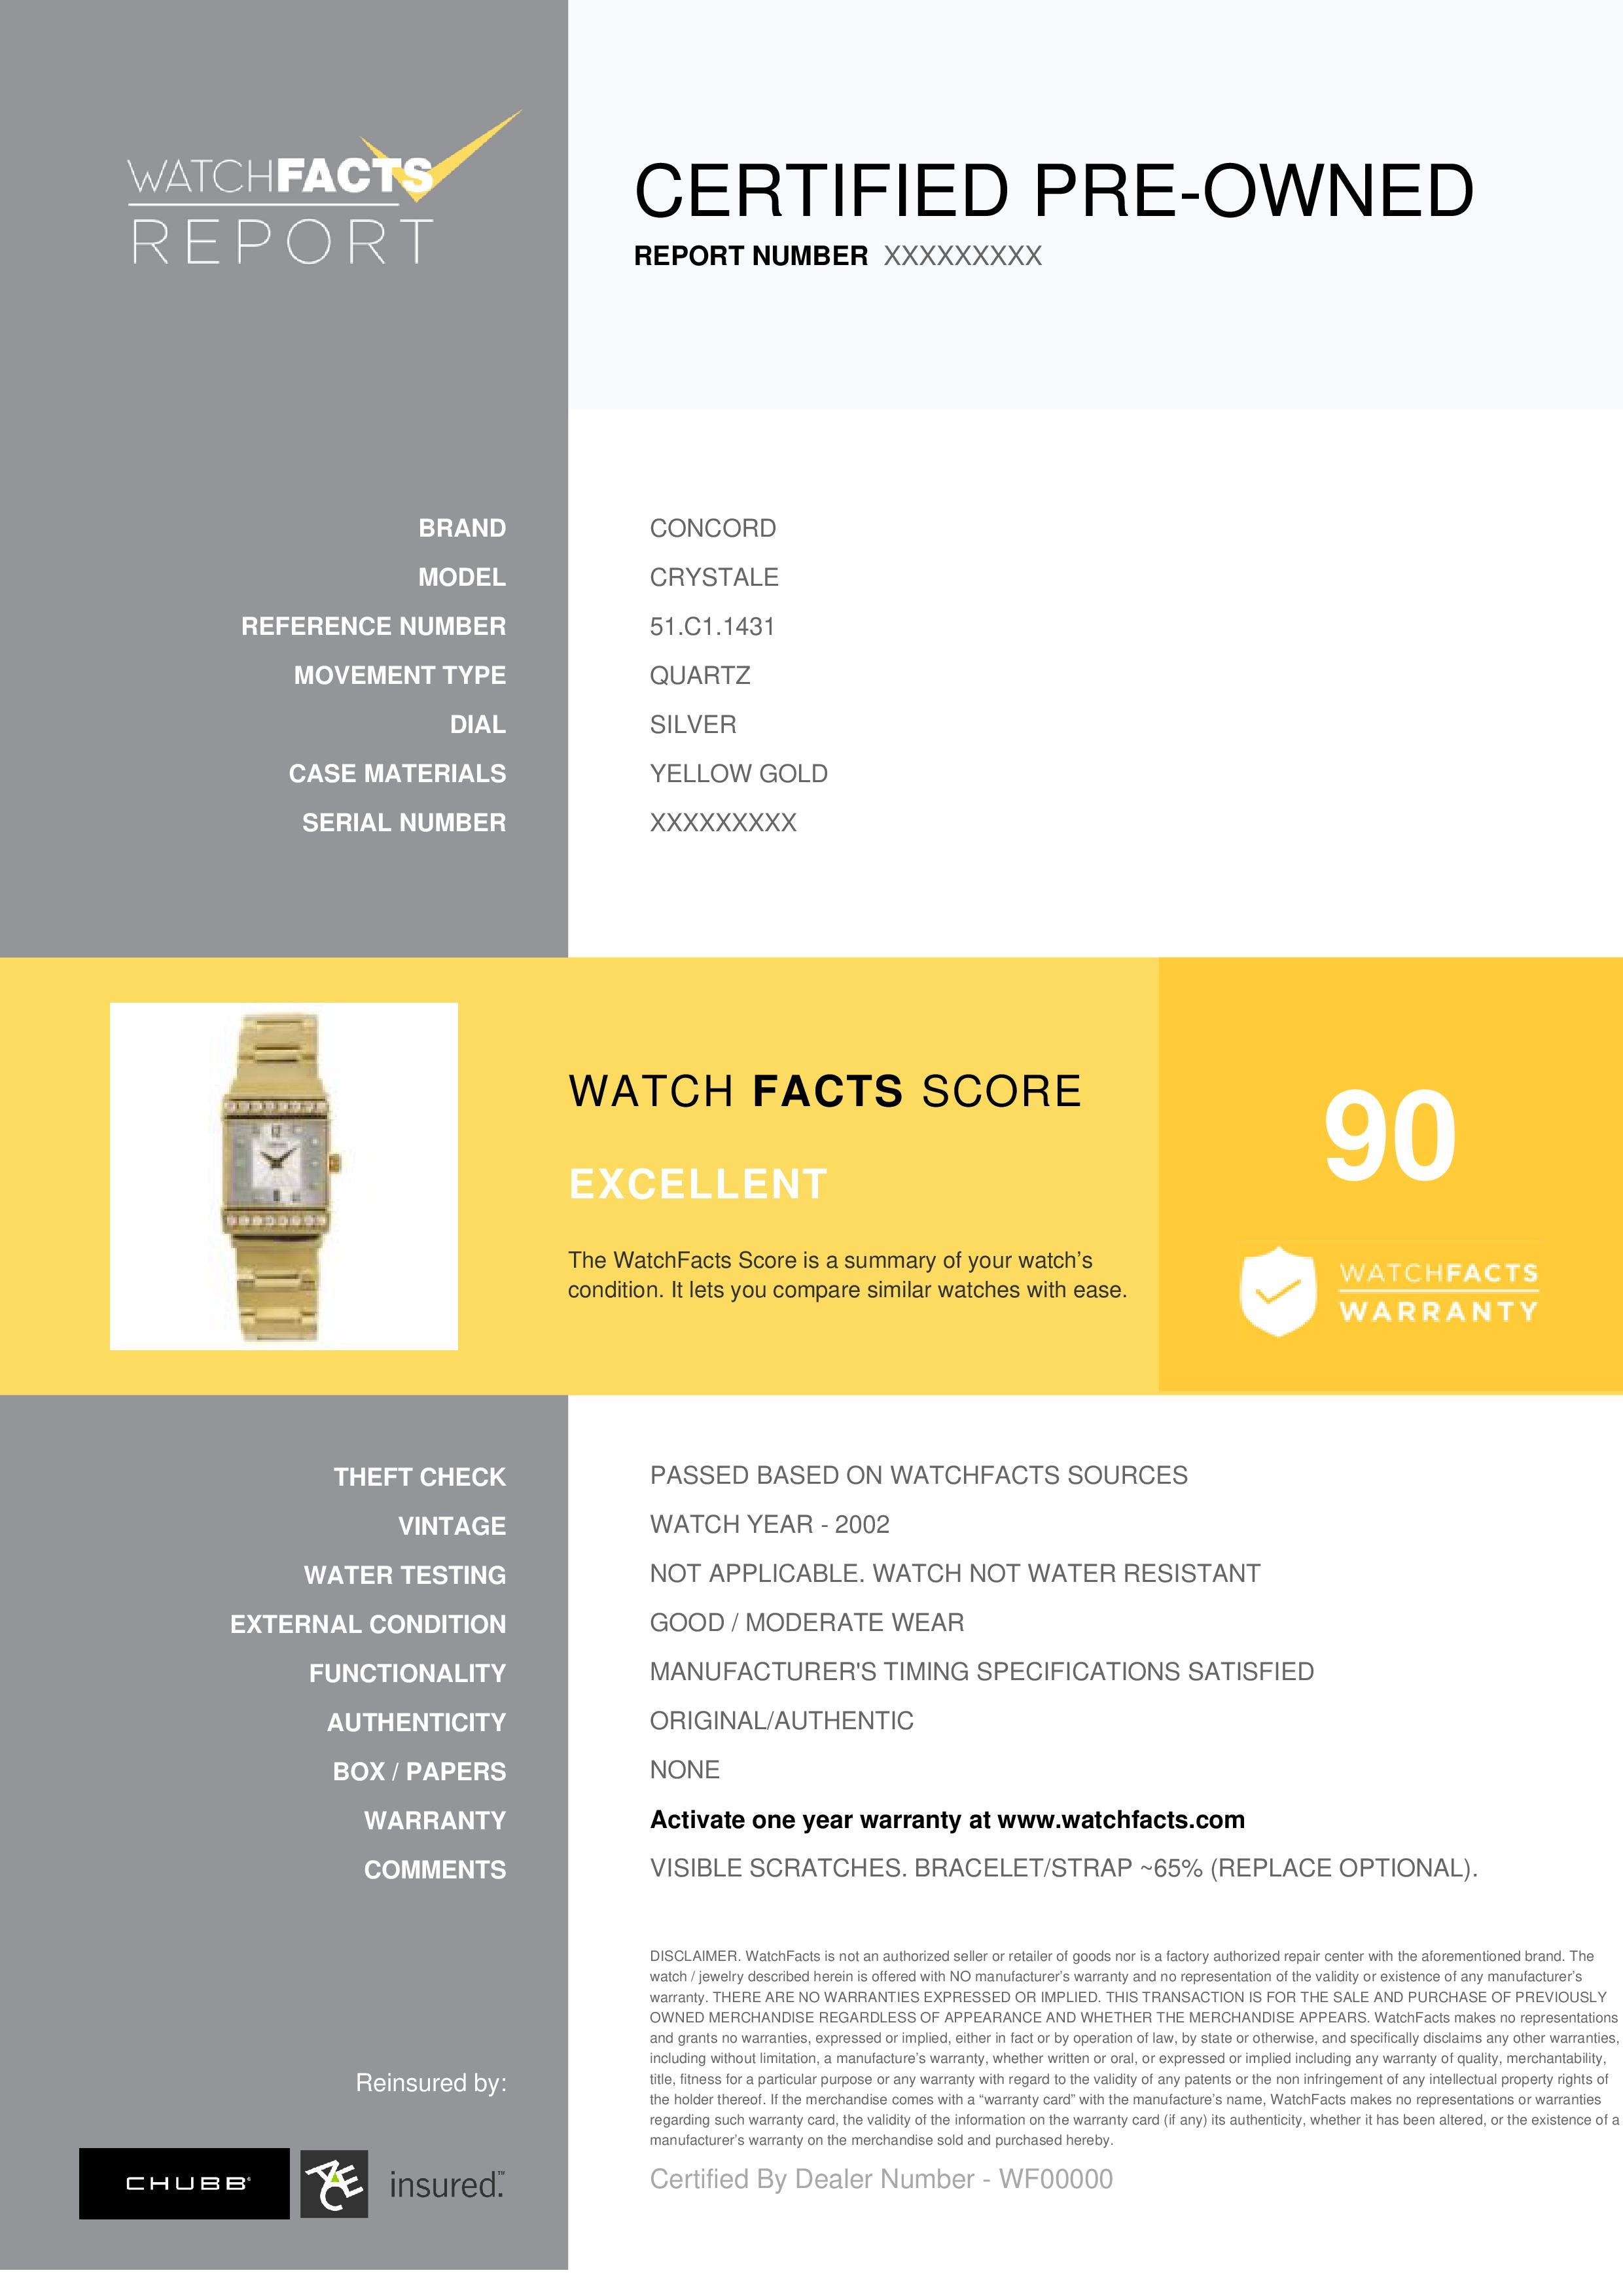 Concord Crystale Reference #: 51.C1.1431. Womens Quartz Watch Yellow Gold Silver 21 MM. Verified and Certified by WatchFacts. 1 year warranty offered by WatchFacts.
